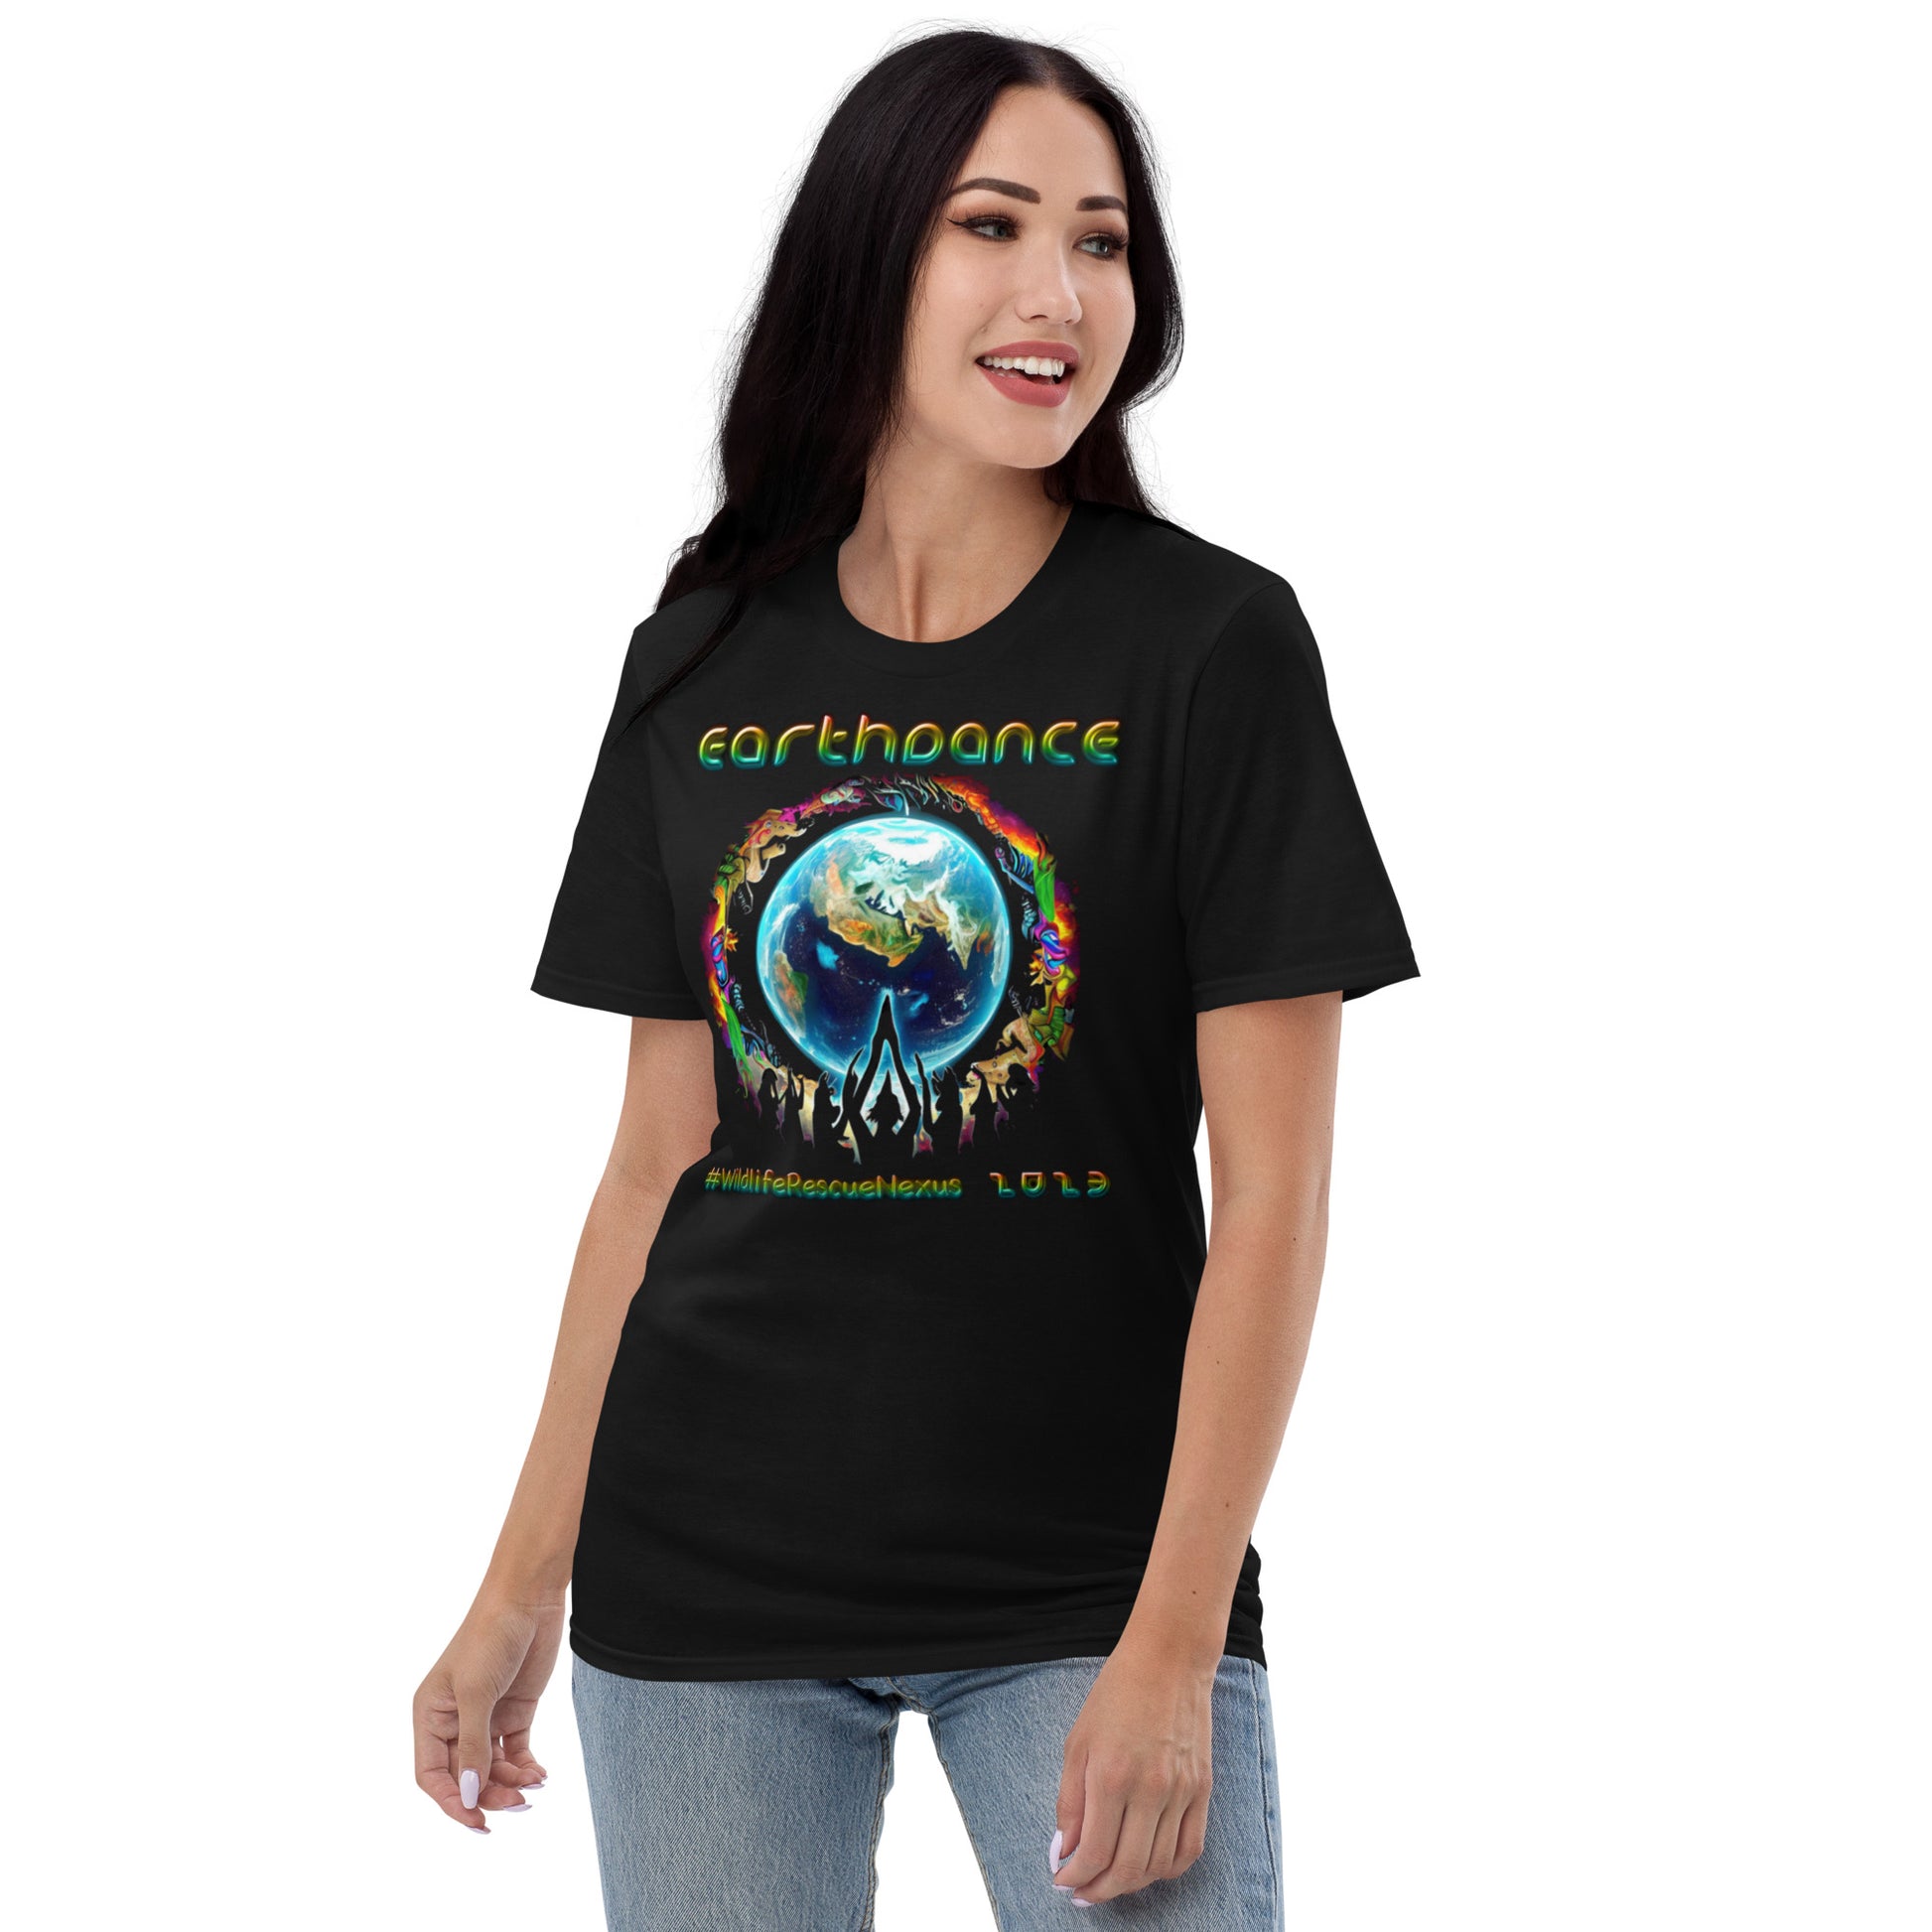 Earthdance 2023 - Amber Leigh v1 - Limited Edition - Short-Sleeve T-Shirt - The Foundation of Families